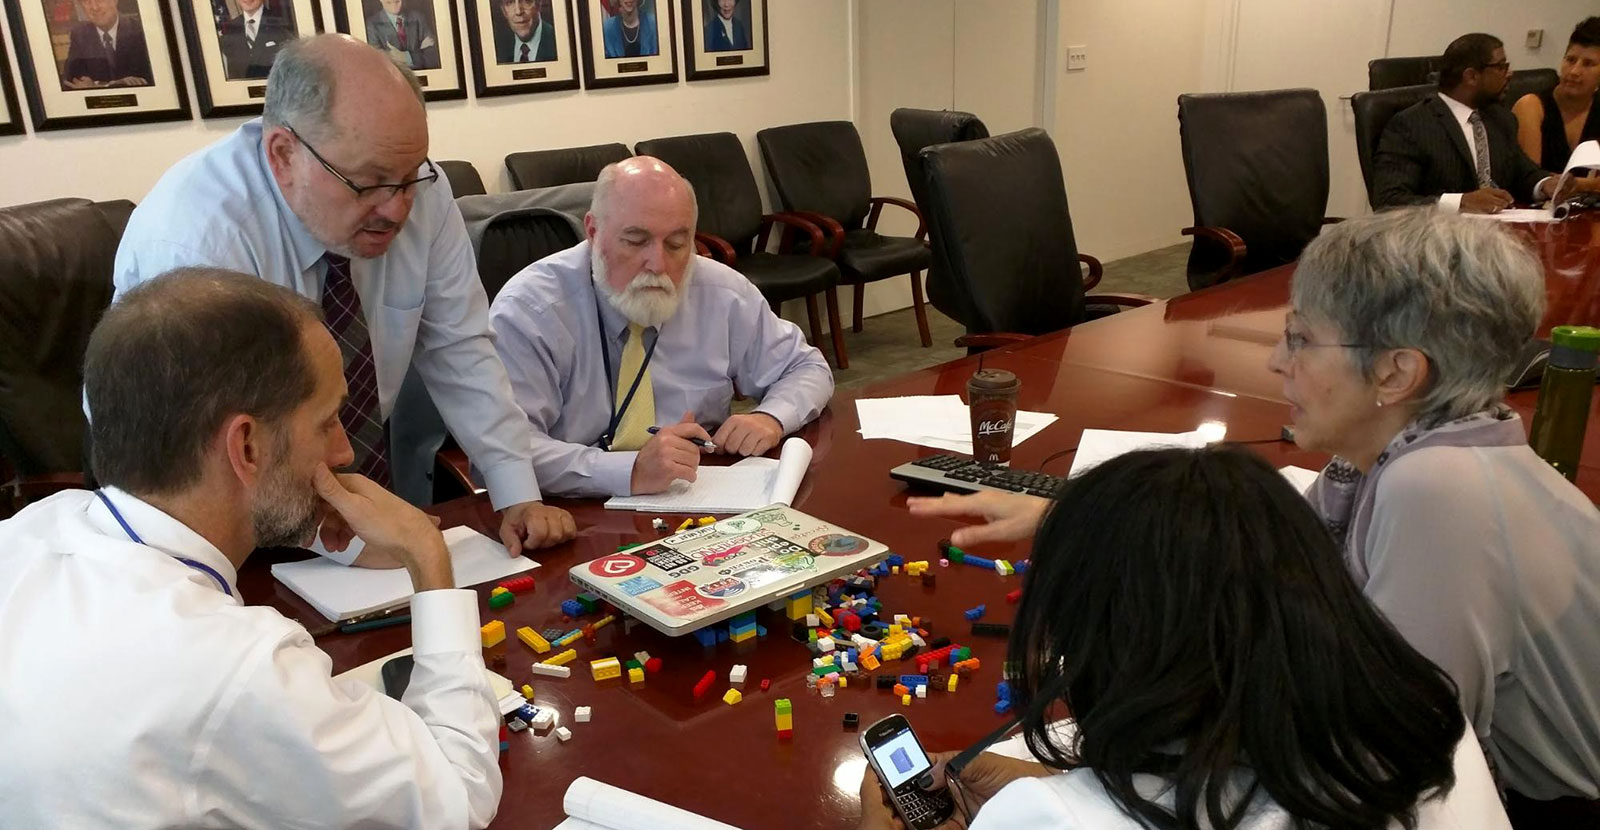 A group of government executives playing with legos.